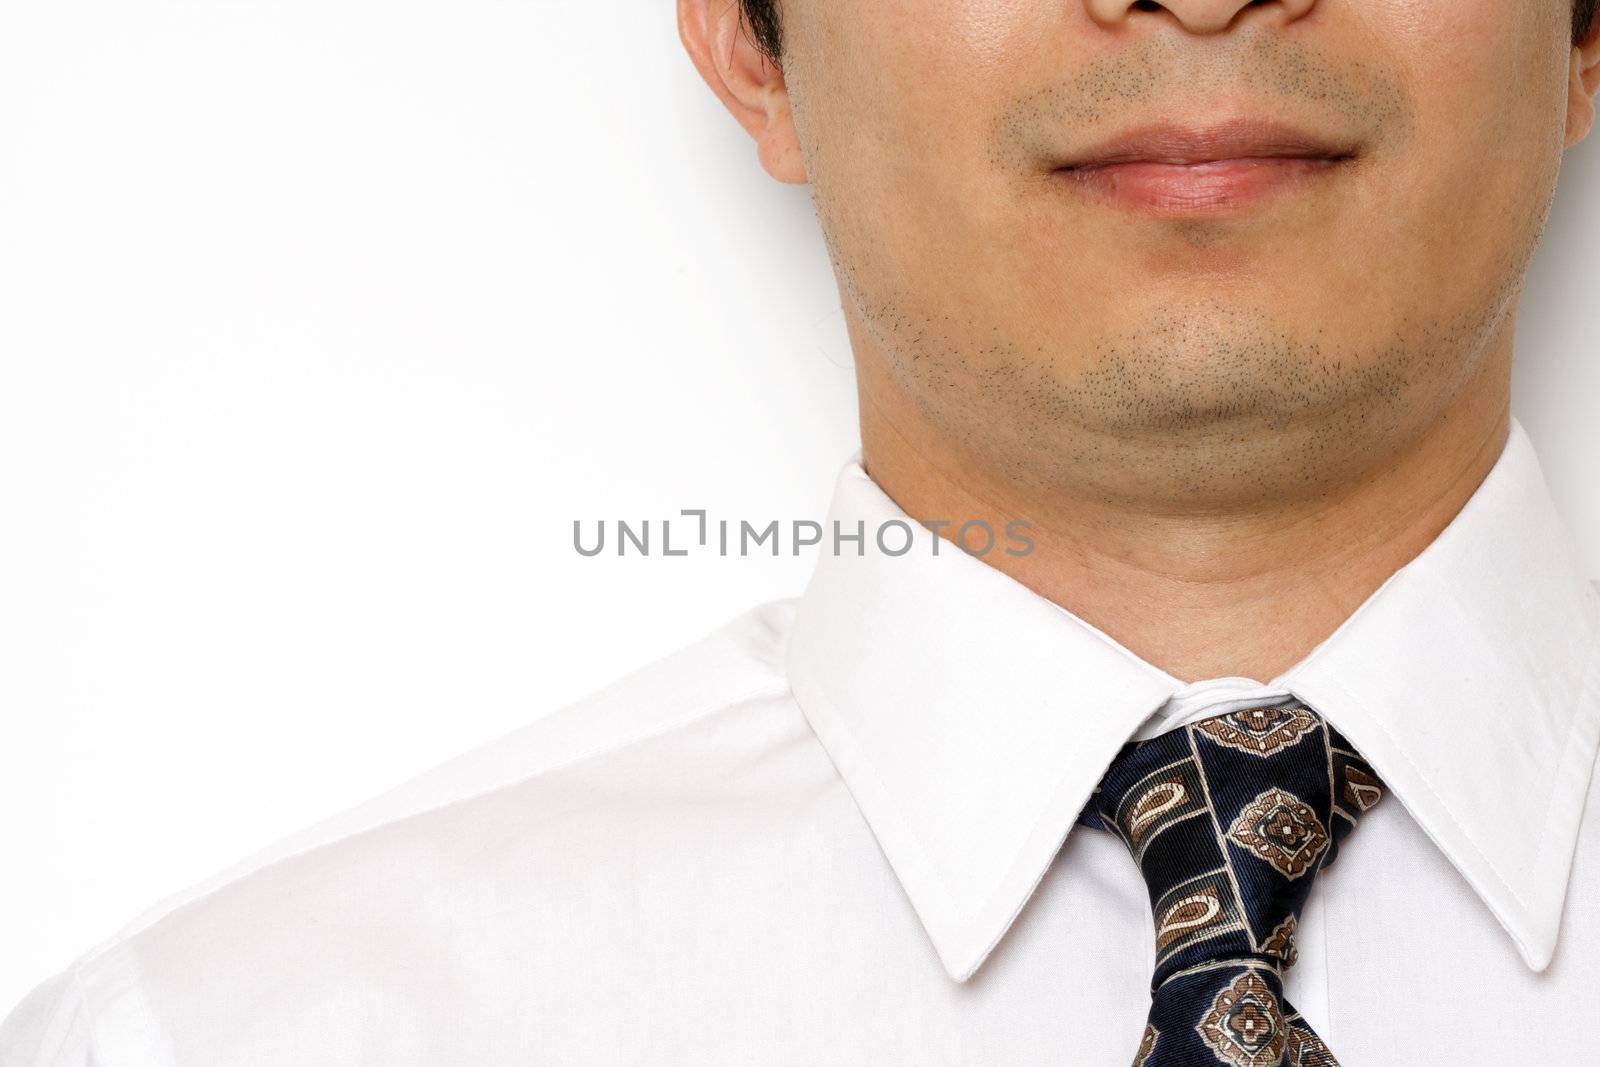 Businessman with formal business wear